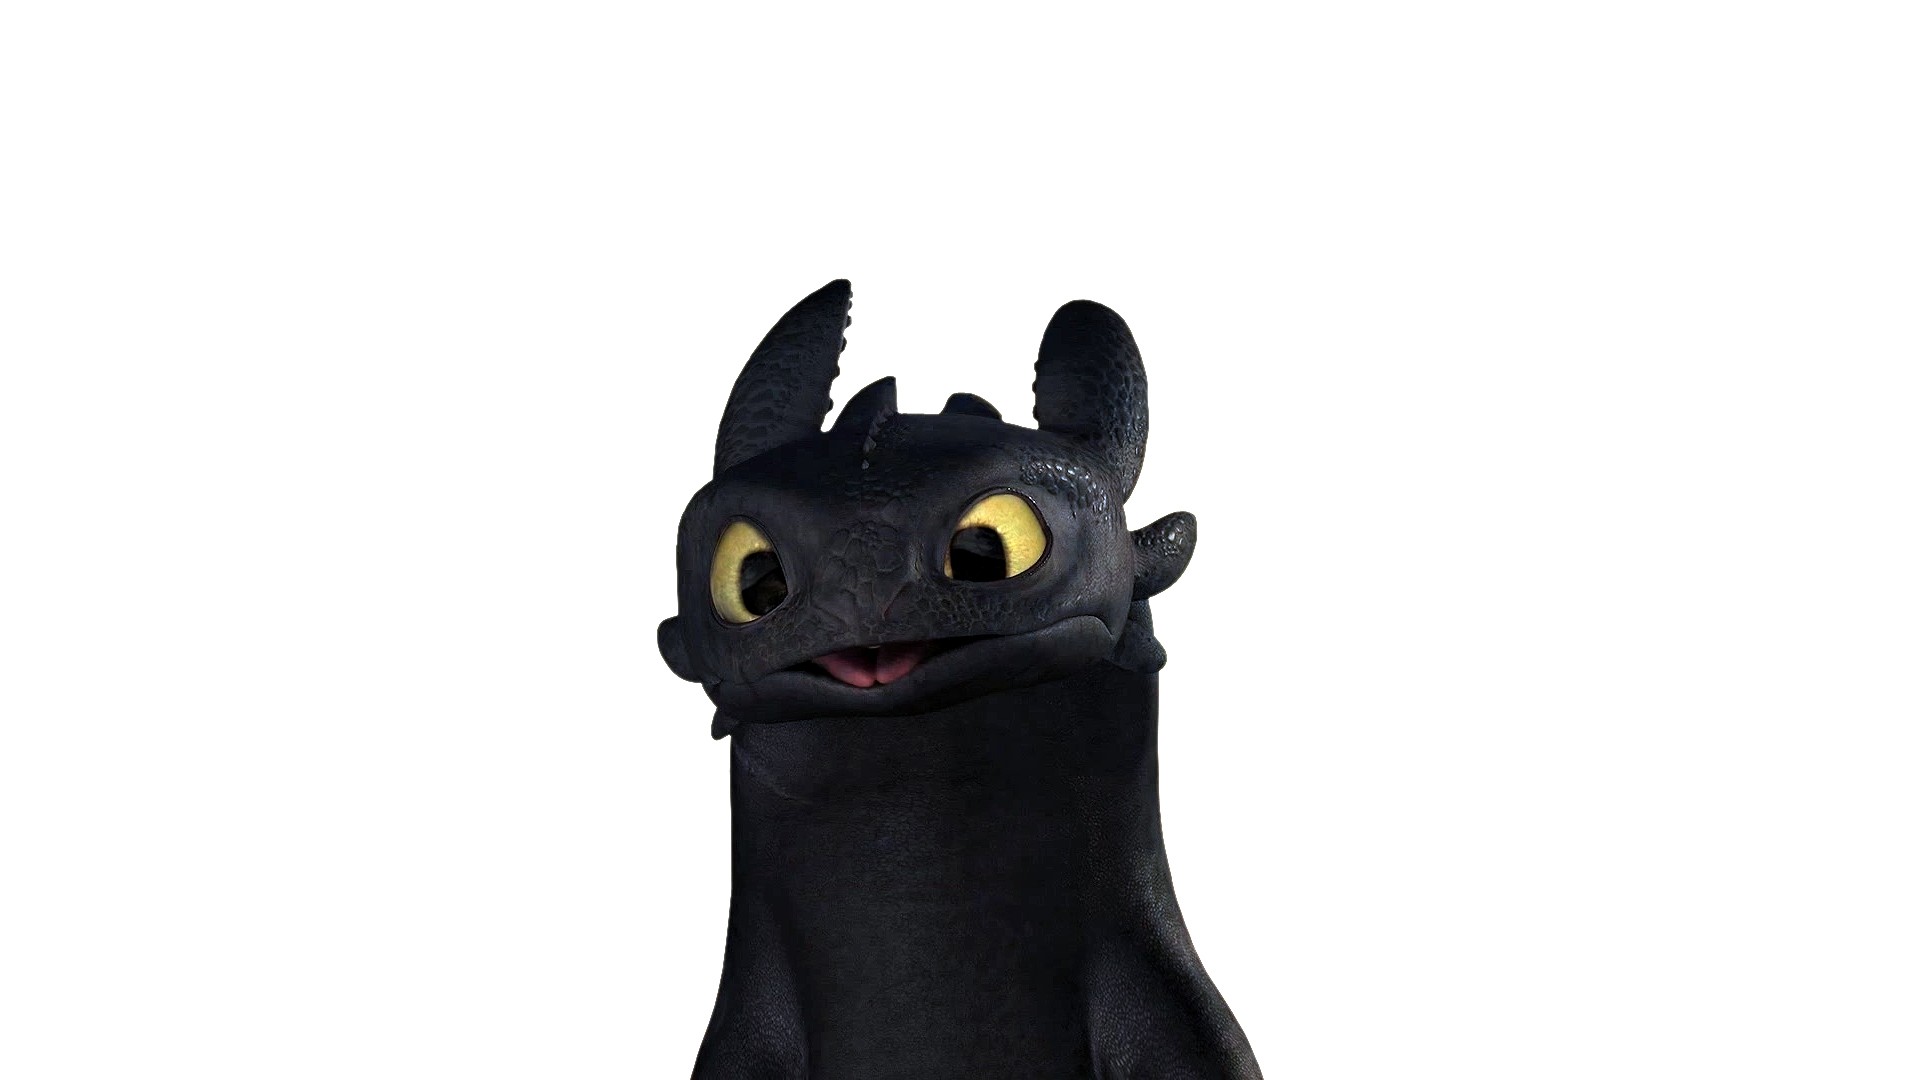 Toothless, Night Fury, How To Train Your Dragon, How To Train Your Dragon 2, Dragon Wallpaper